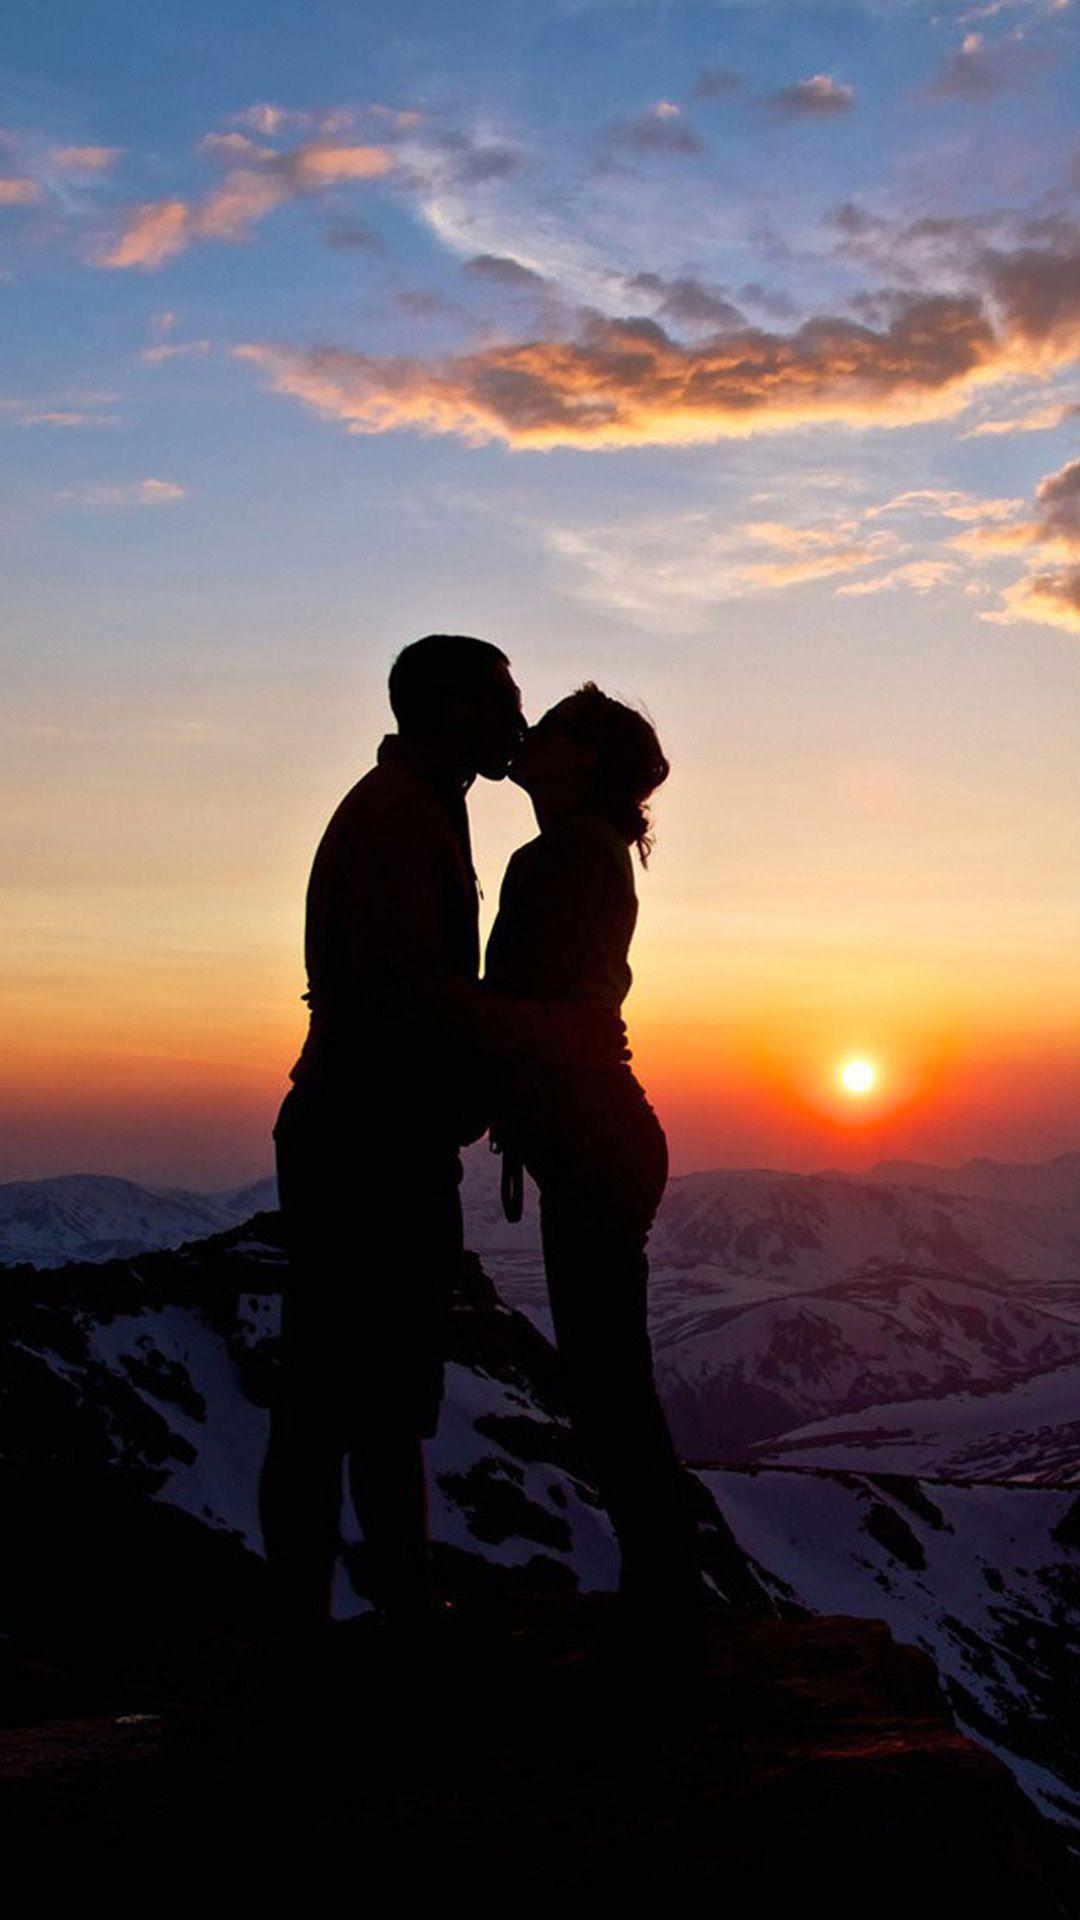 Lover Couple Sunset Snowy Mountain Top Outlines iPhone 6 Wallpaper Download. iPhone Wallpaper, iPad wallpaper O. Love couple wallpaper, Sunset wallpaper, Photo